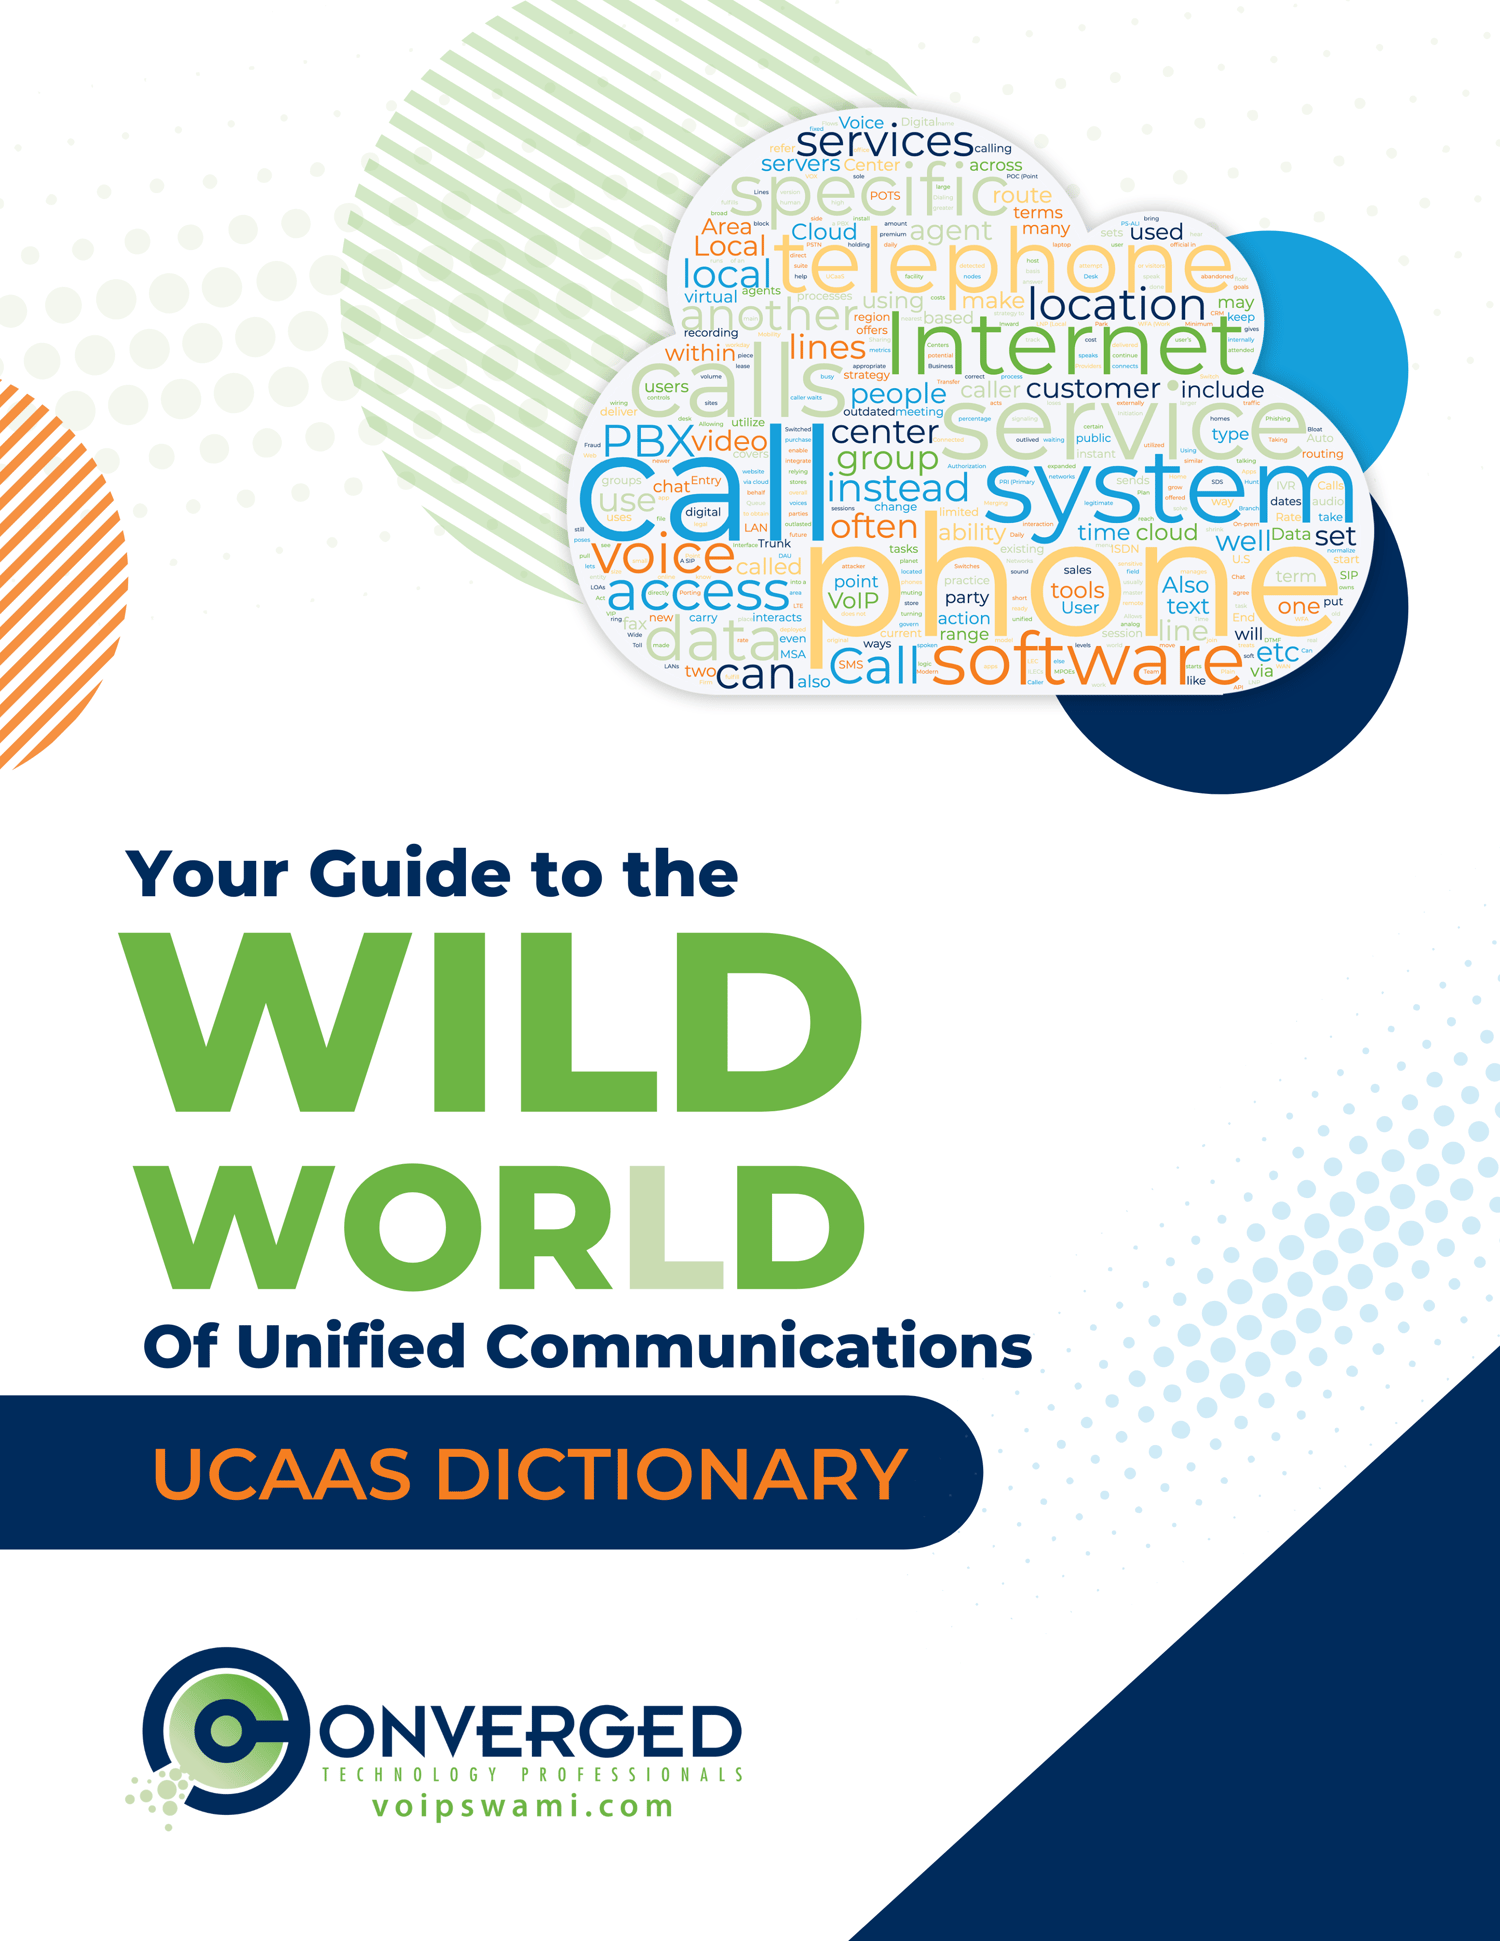 UCaaS Dictionary: Your guide to the Wild World of Unified Communications